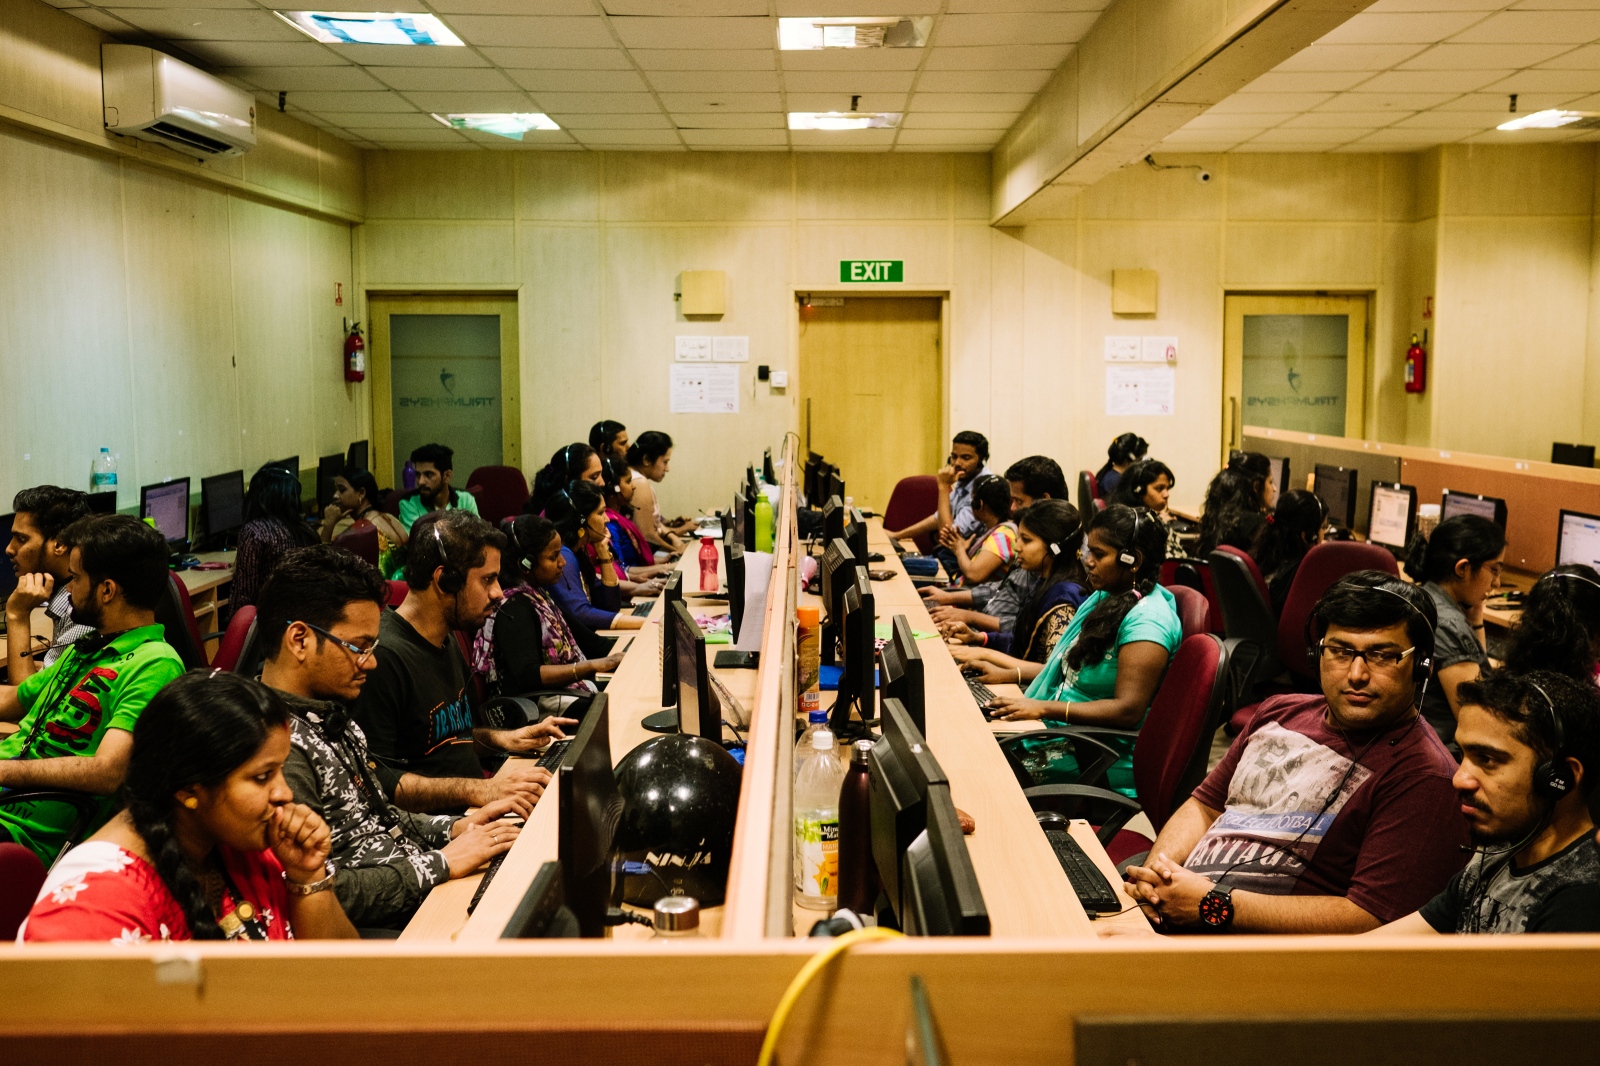 One of the working rooms of Altius, a call centre company based in Navi Mumbai, calling during the day Indian and Middle East based costumers. During the night they call and answer calls from the USA and the UK. Navi Mumbai, India. 8th March 2016.